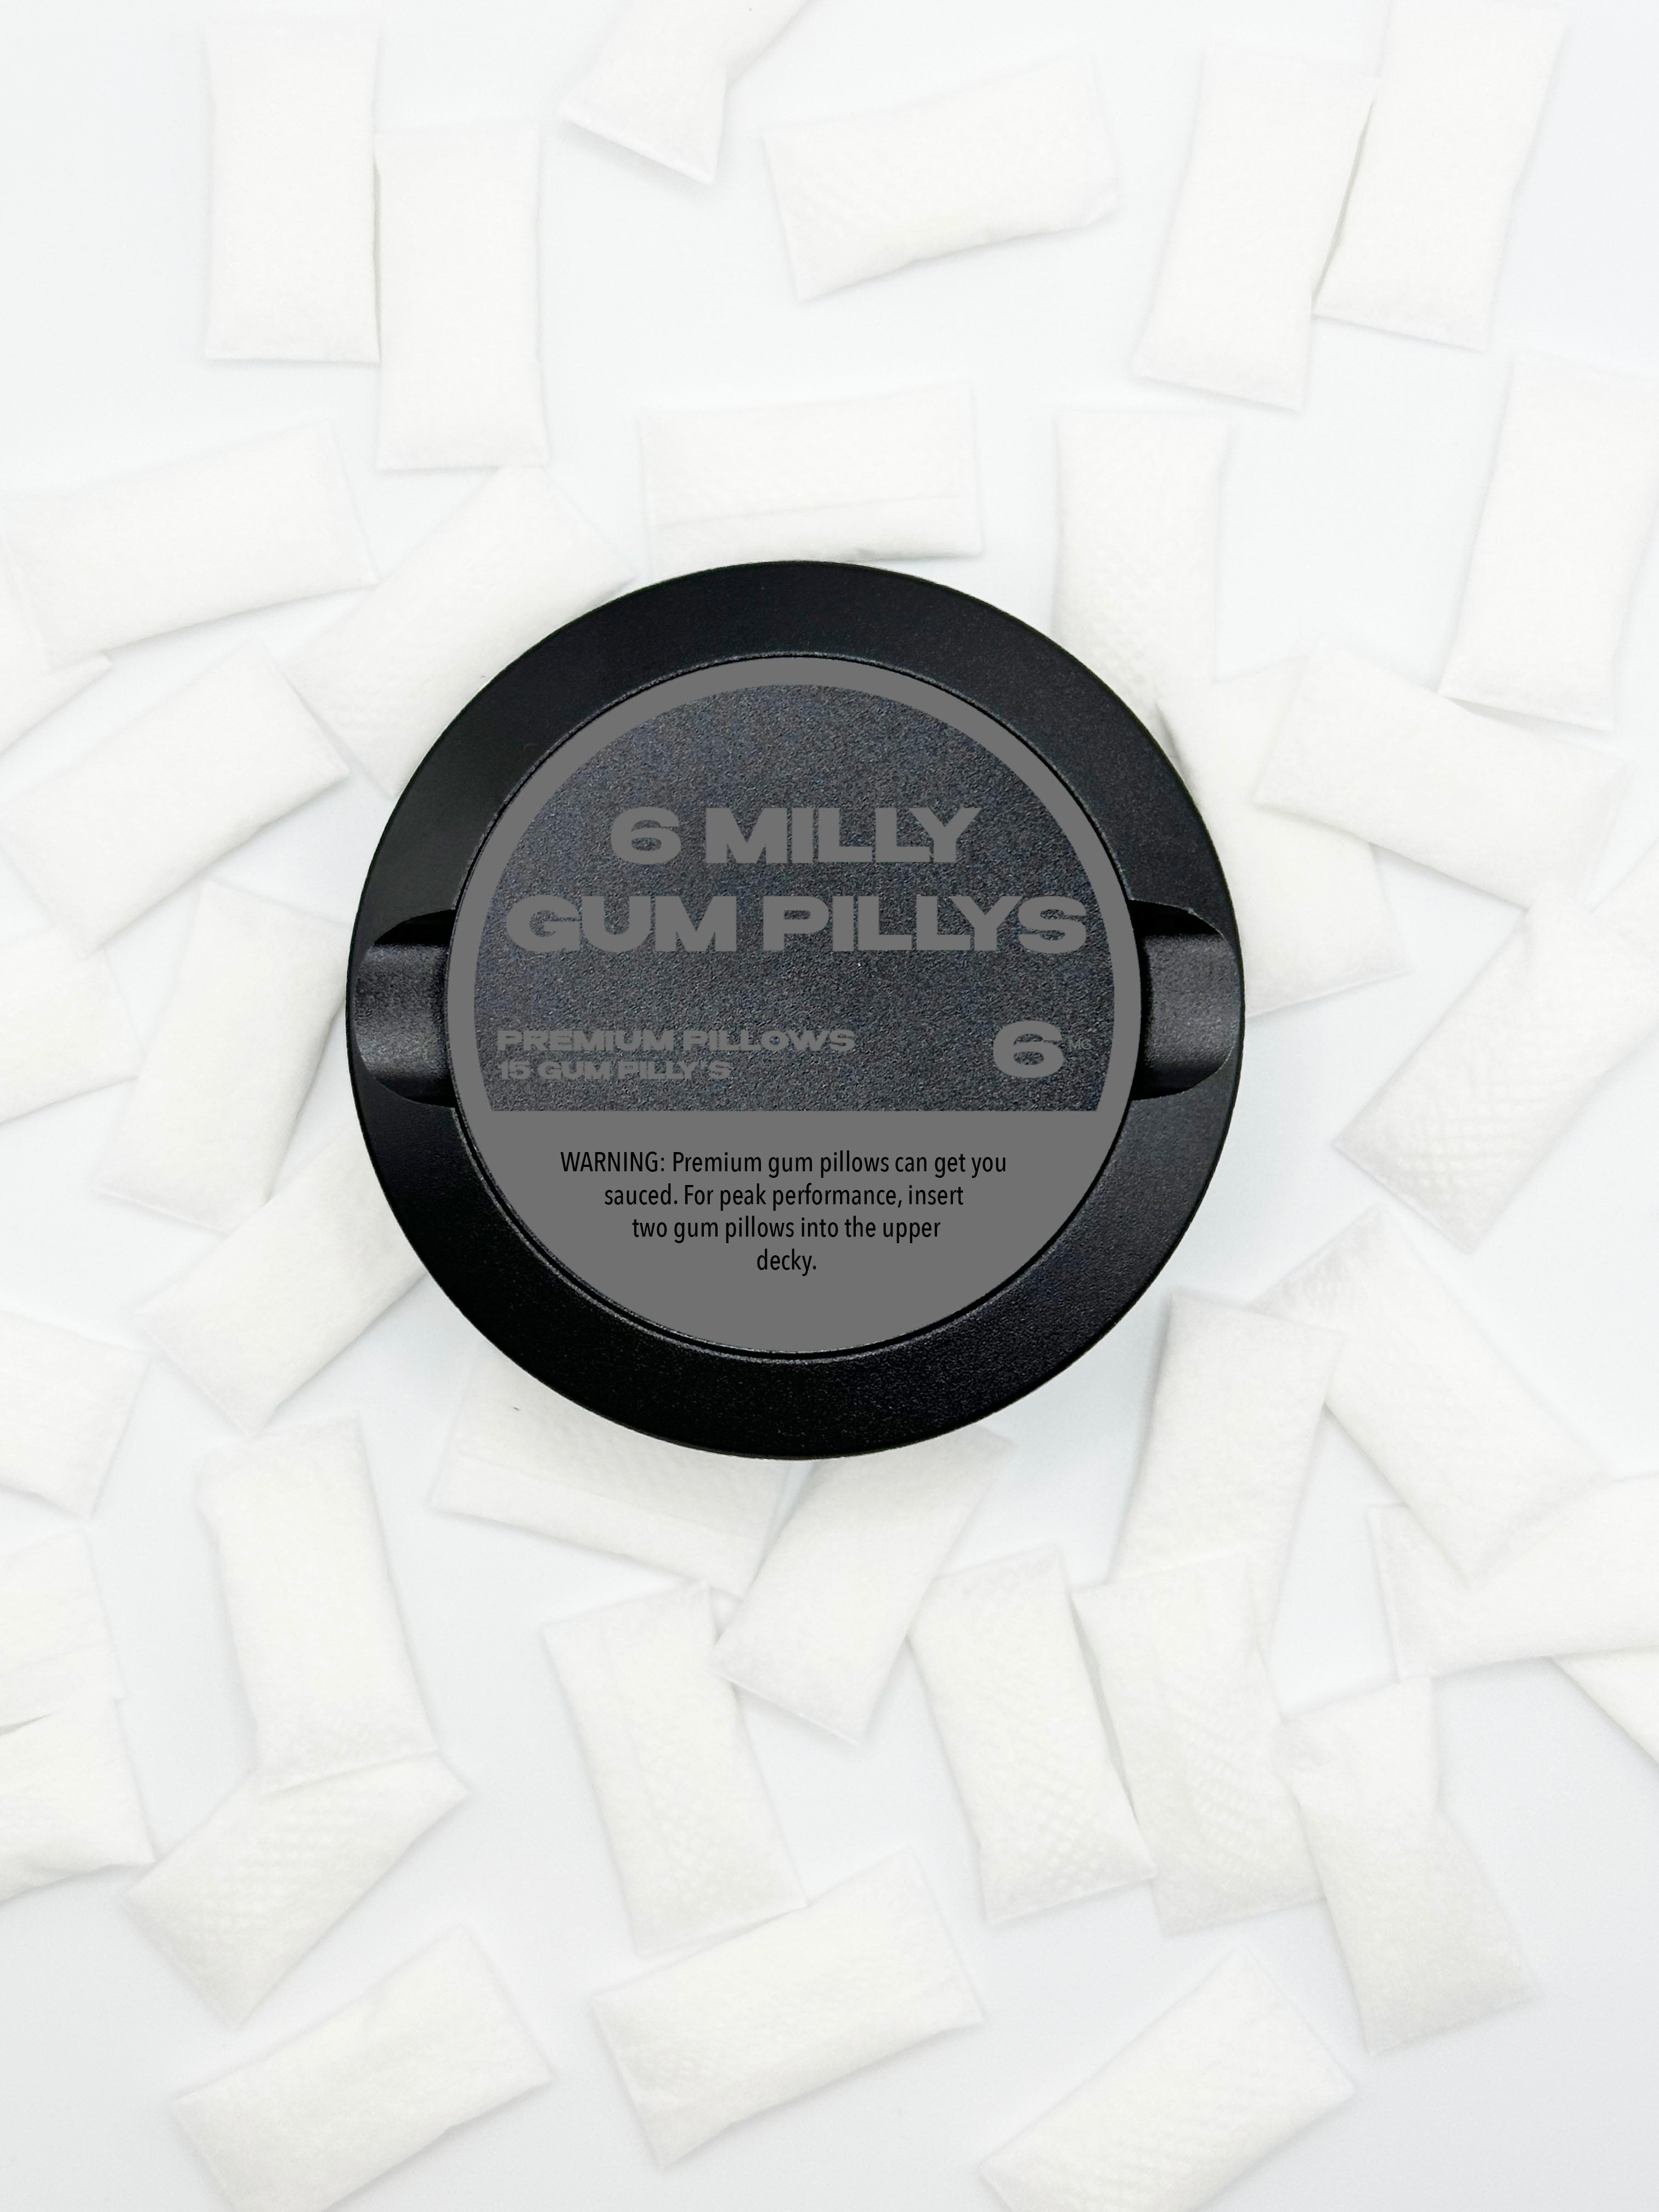 EDITION 009: 6 MILLY PILLY